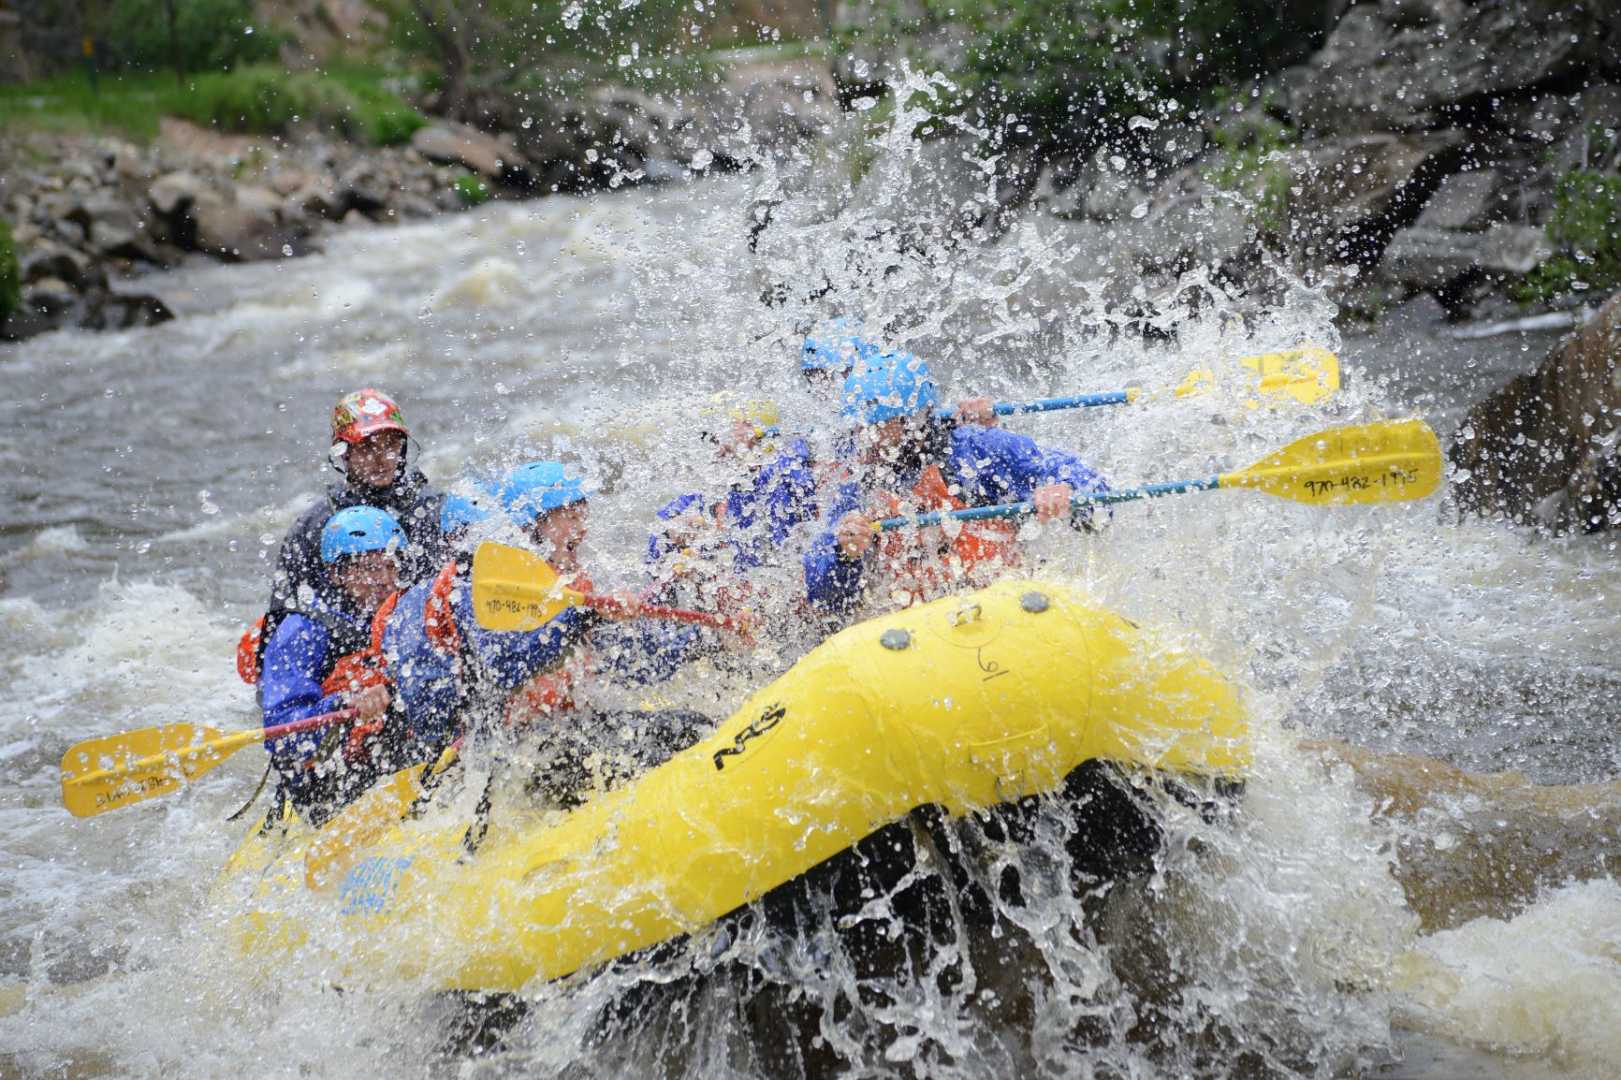 FAQ - Rafting in Colorado on the Poudre River with A Wanderlust Adventure